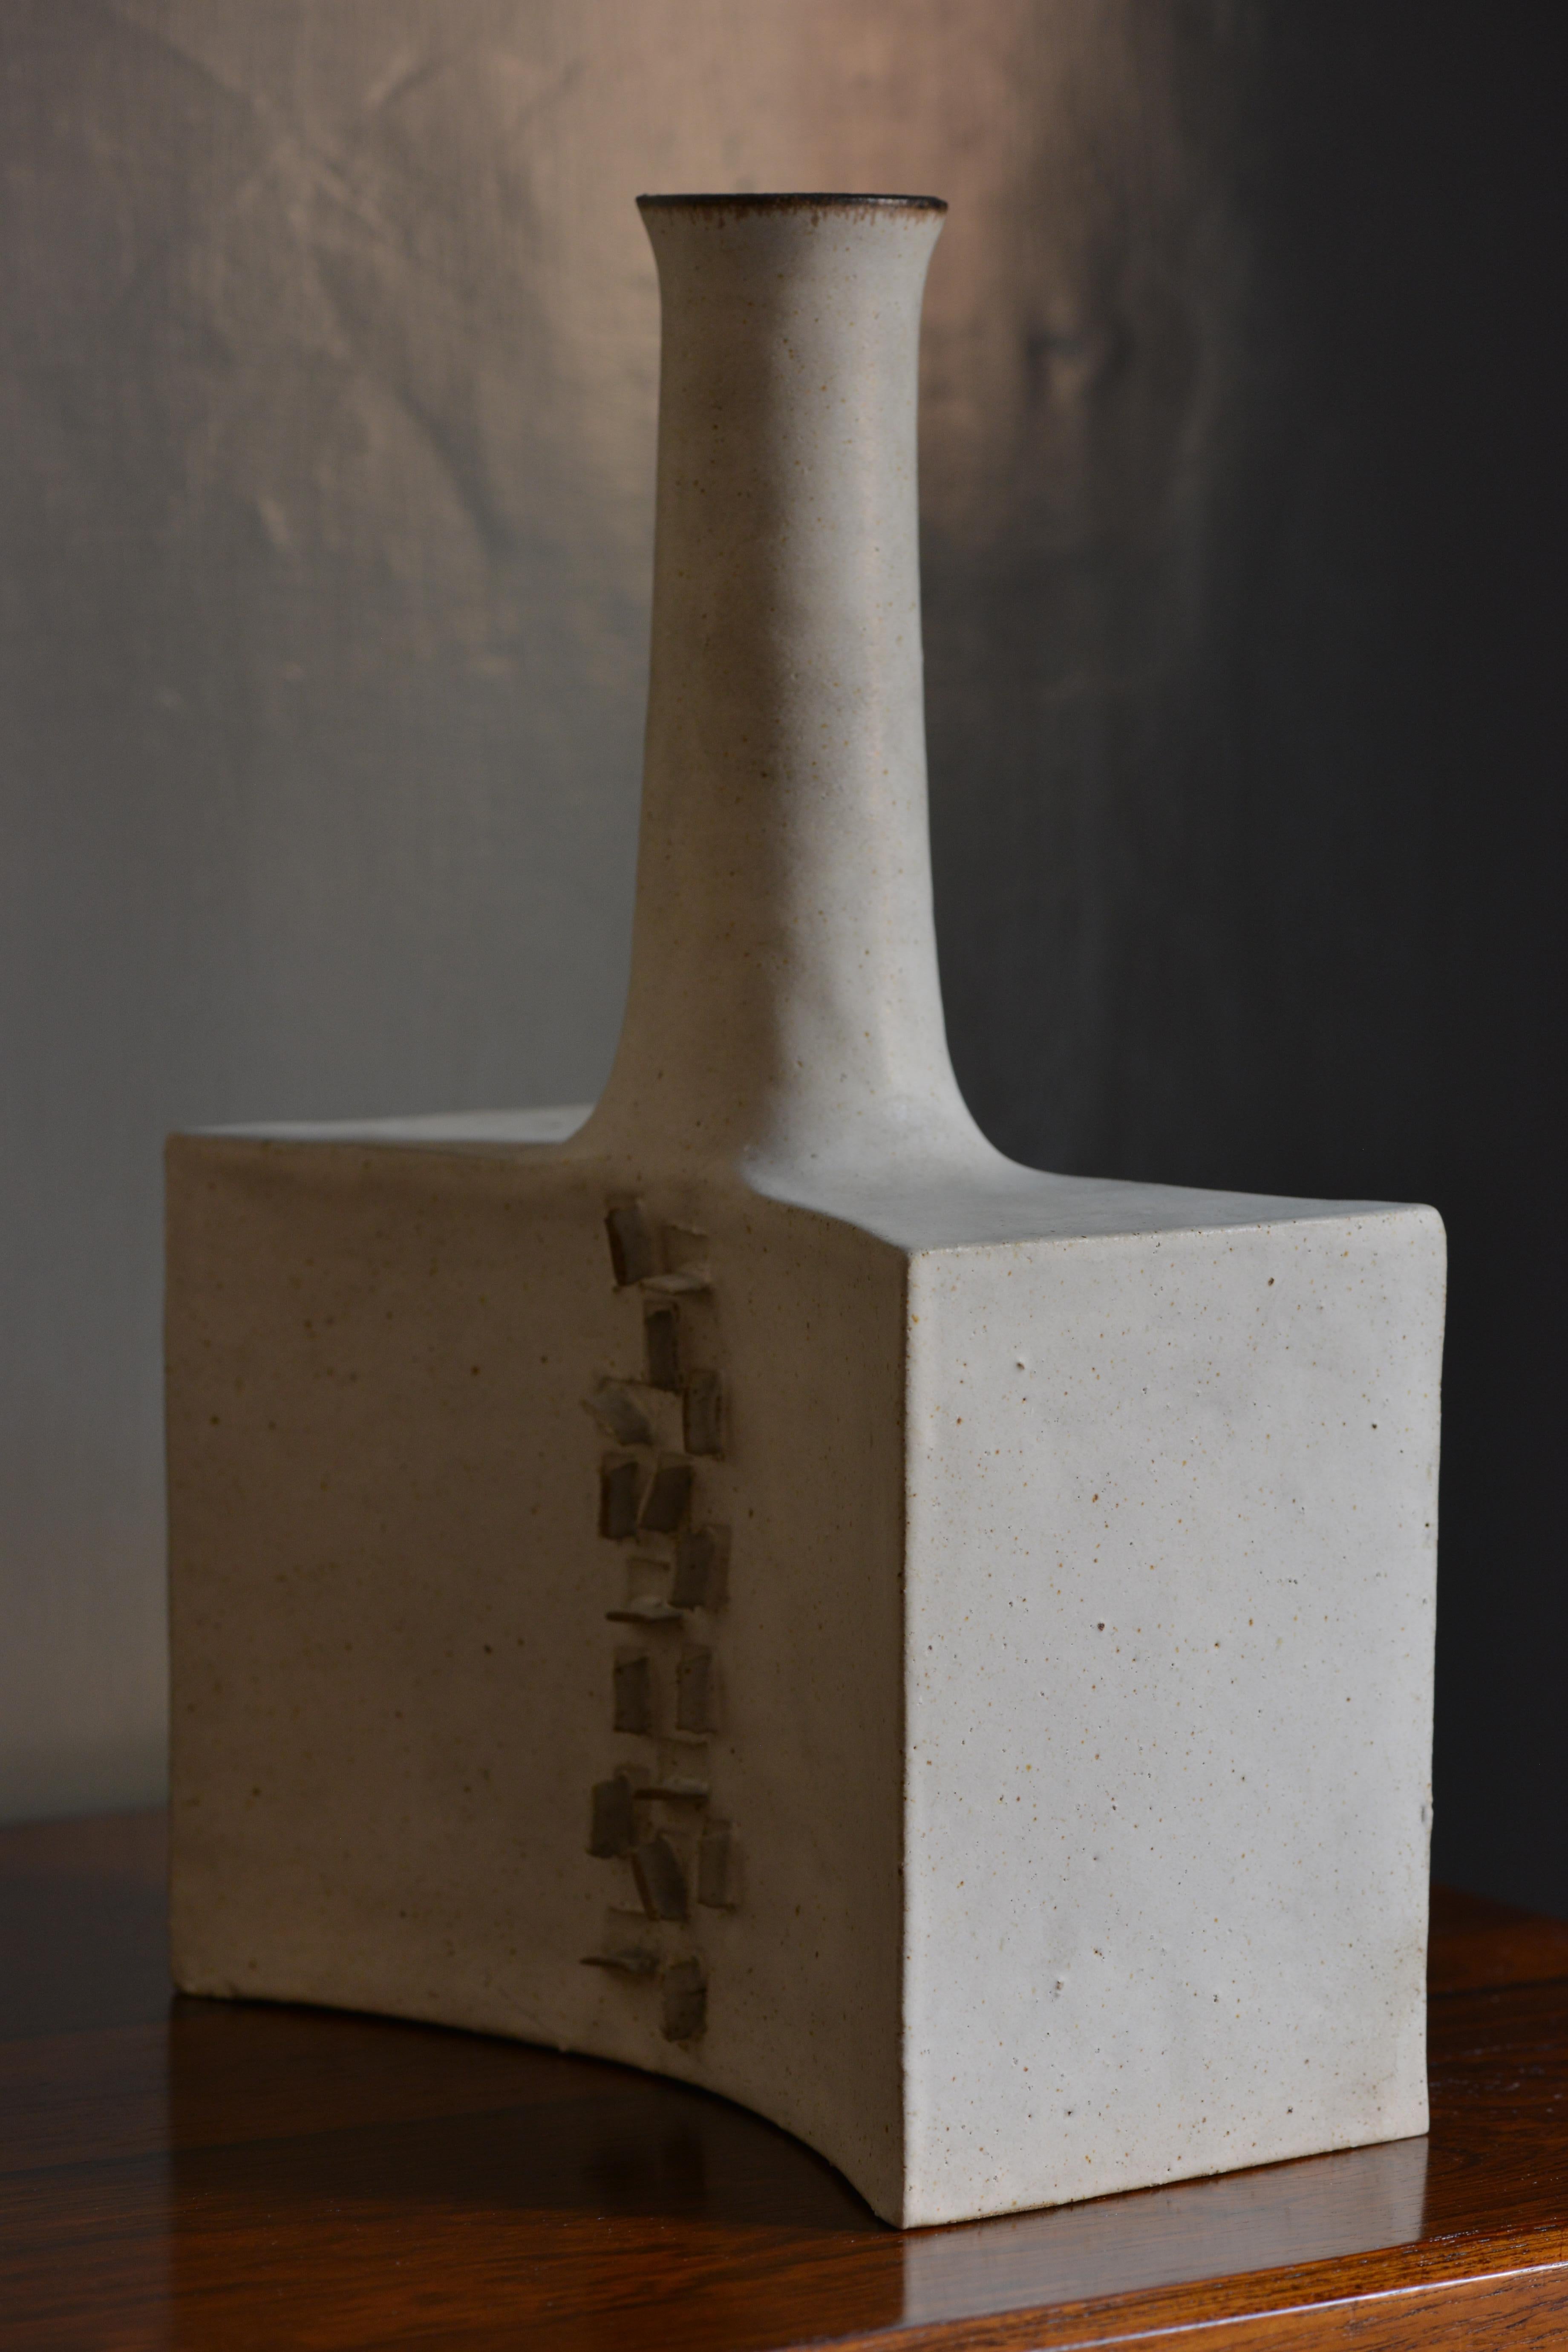 This one-of-a-kind piece by Bruno Gambone, realized in 1982, is signed by the artist on the bottom and is a variation on the typical bottle-vase theme.